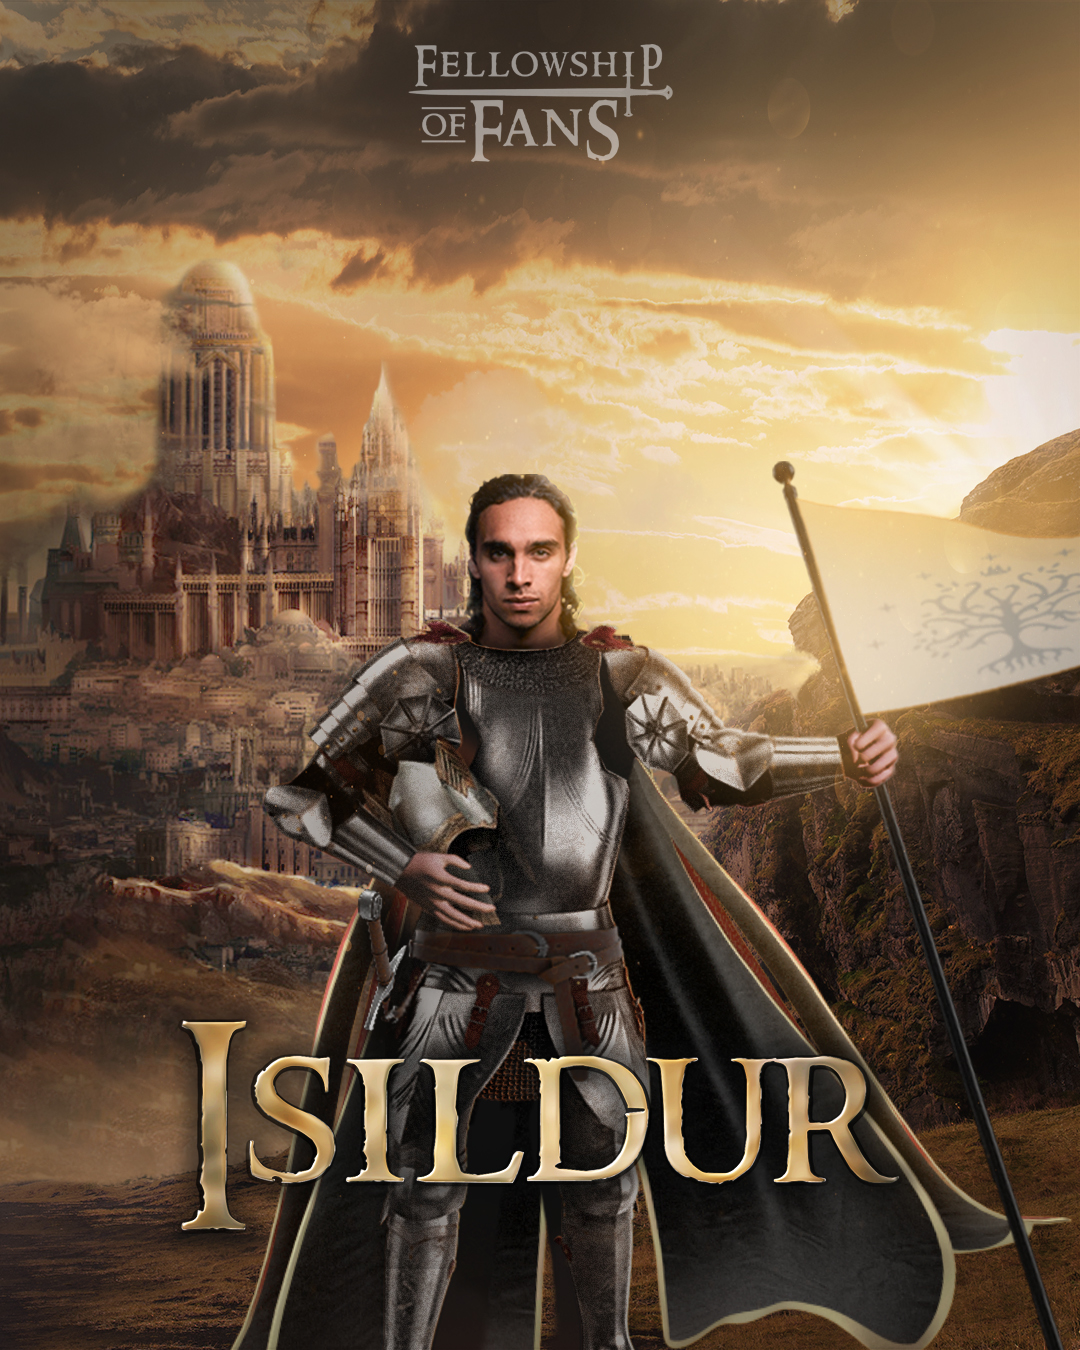 Fellowship of Fans on Twitter: "EXCLUSIVE: ISILDUR will be one of the main  characters from around episode 3 onwards in the upcoming Amazon 'The Lord  of the Rings' TV Series after 6